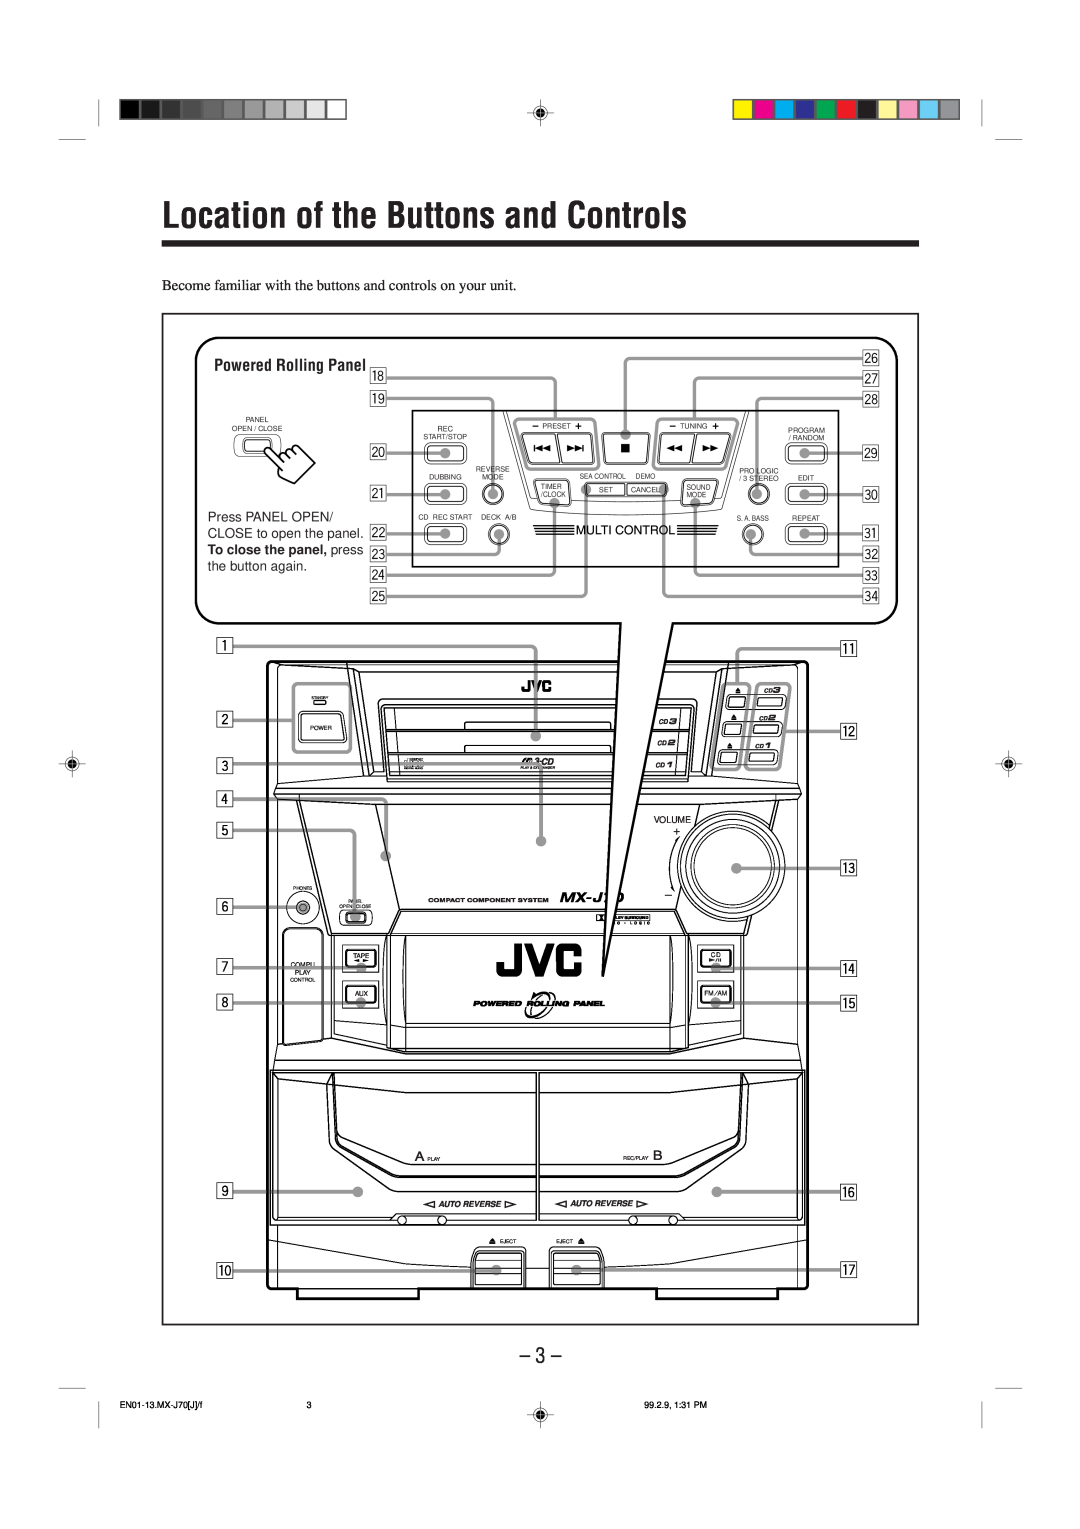 JVC Model MX-J70J manual Location of the Buttons and Controls 